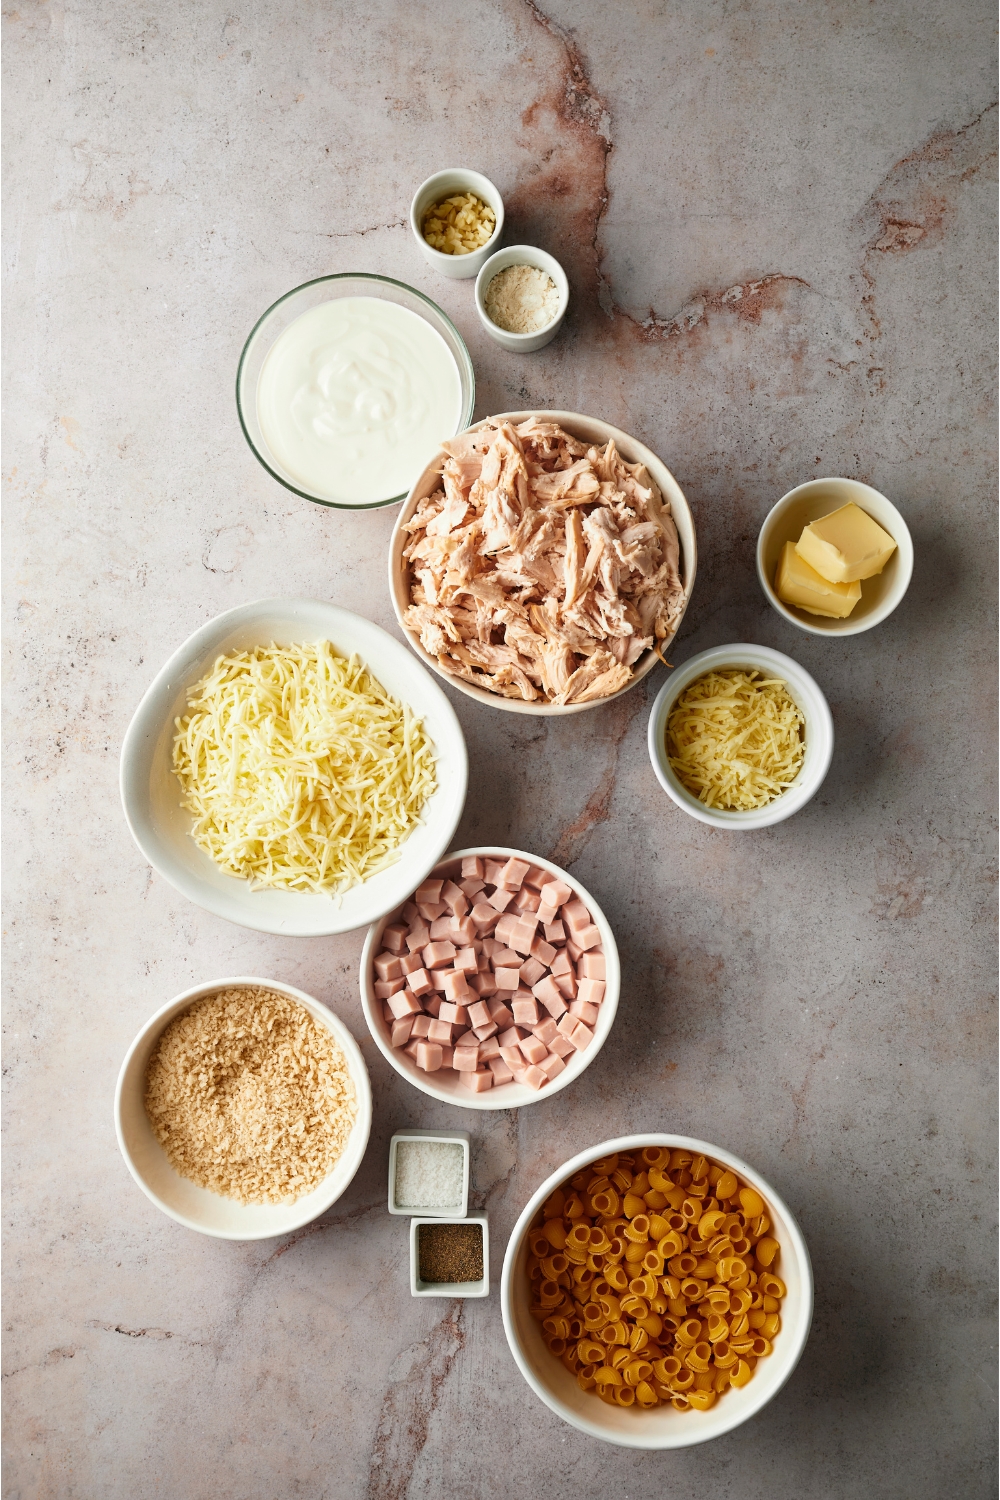 An assortment of ingredients for chicken cordon bleu casserole including bowls of shredded cheese, shredded chicken, uncooked pasta, bread crumbs, diced ham, butter and spices.